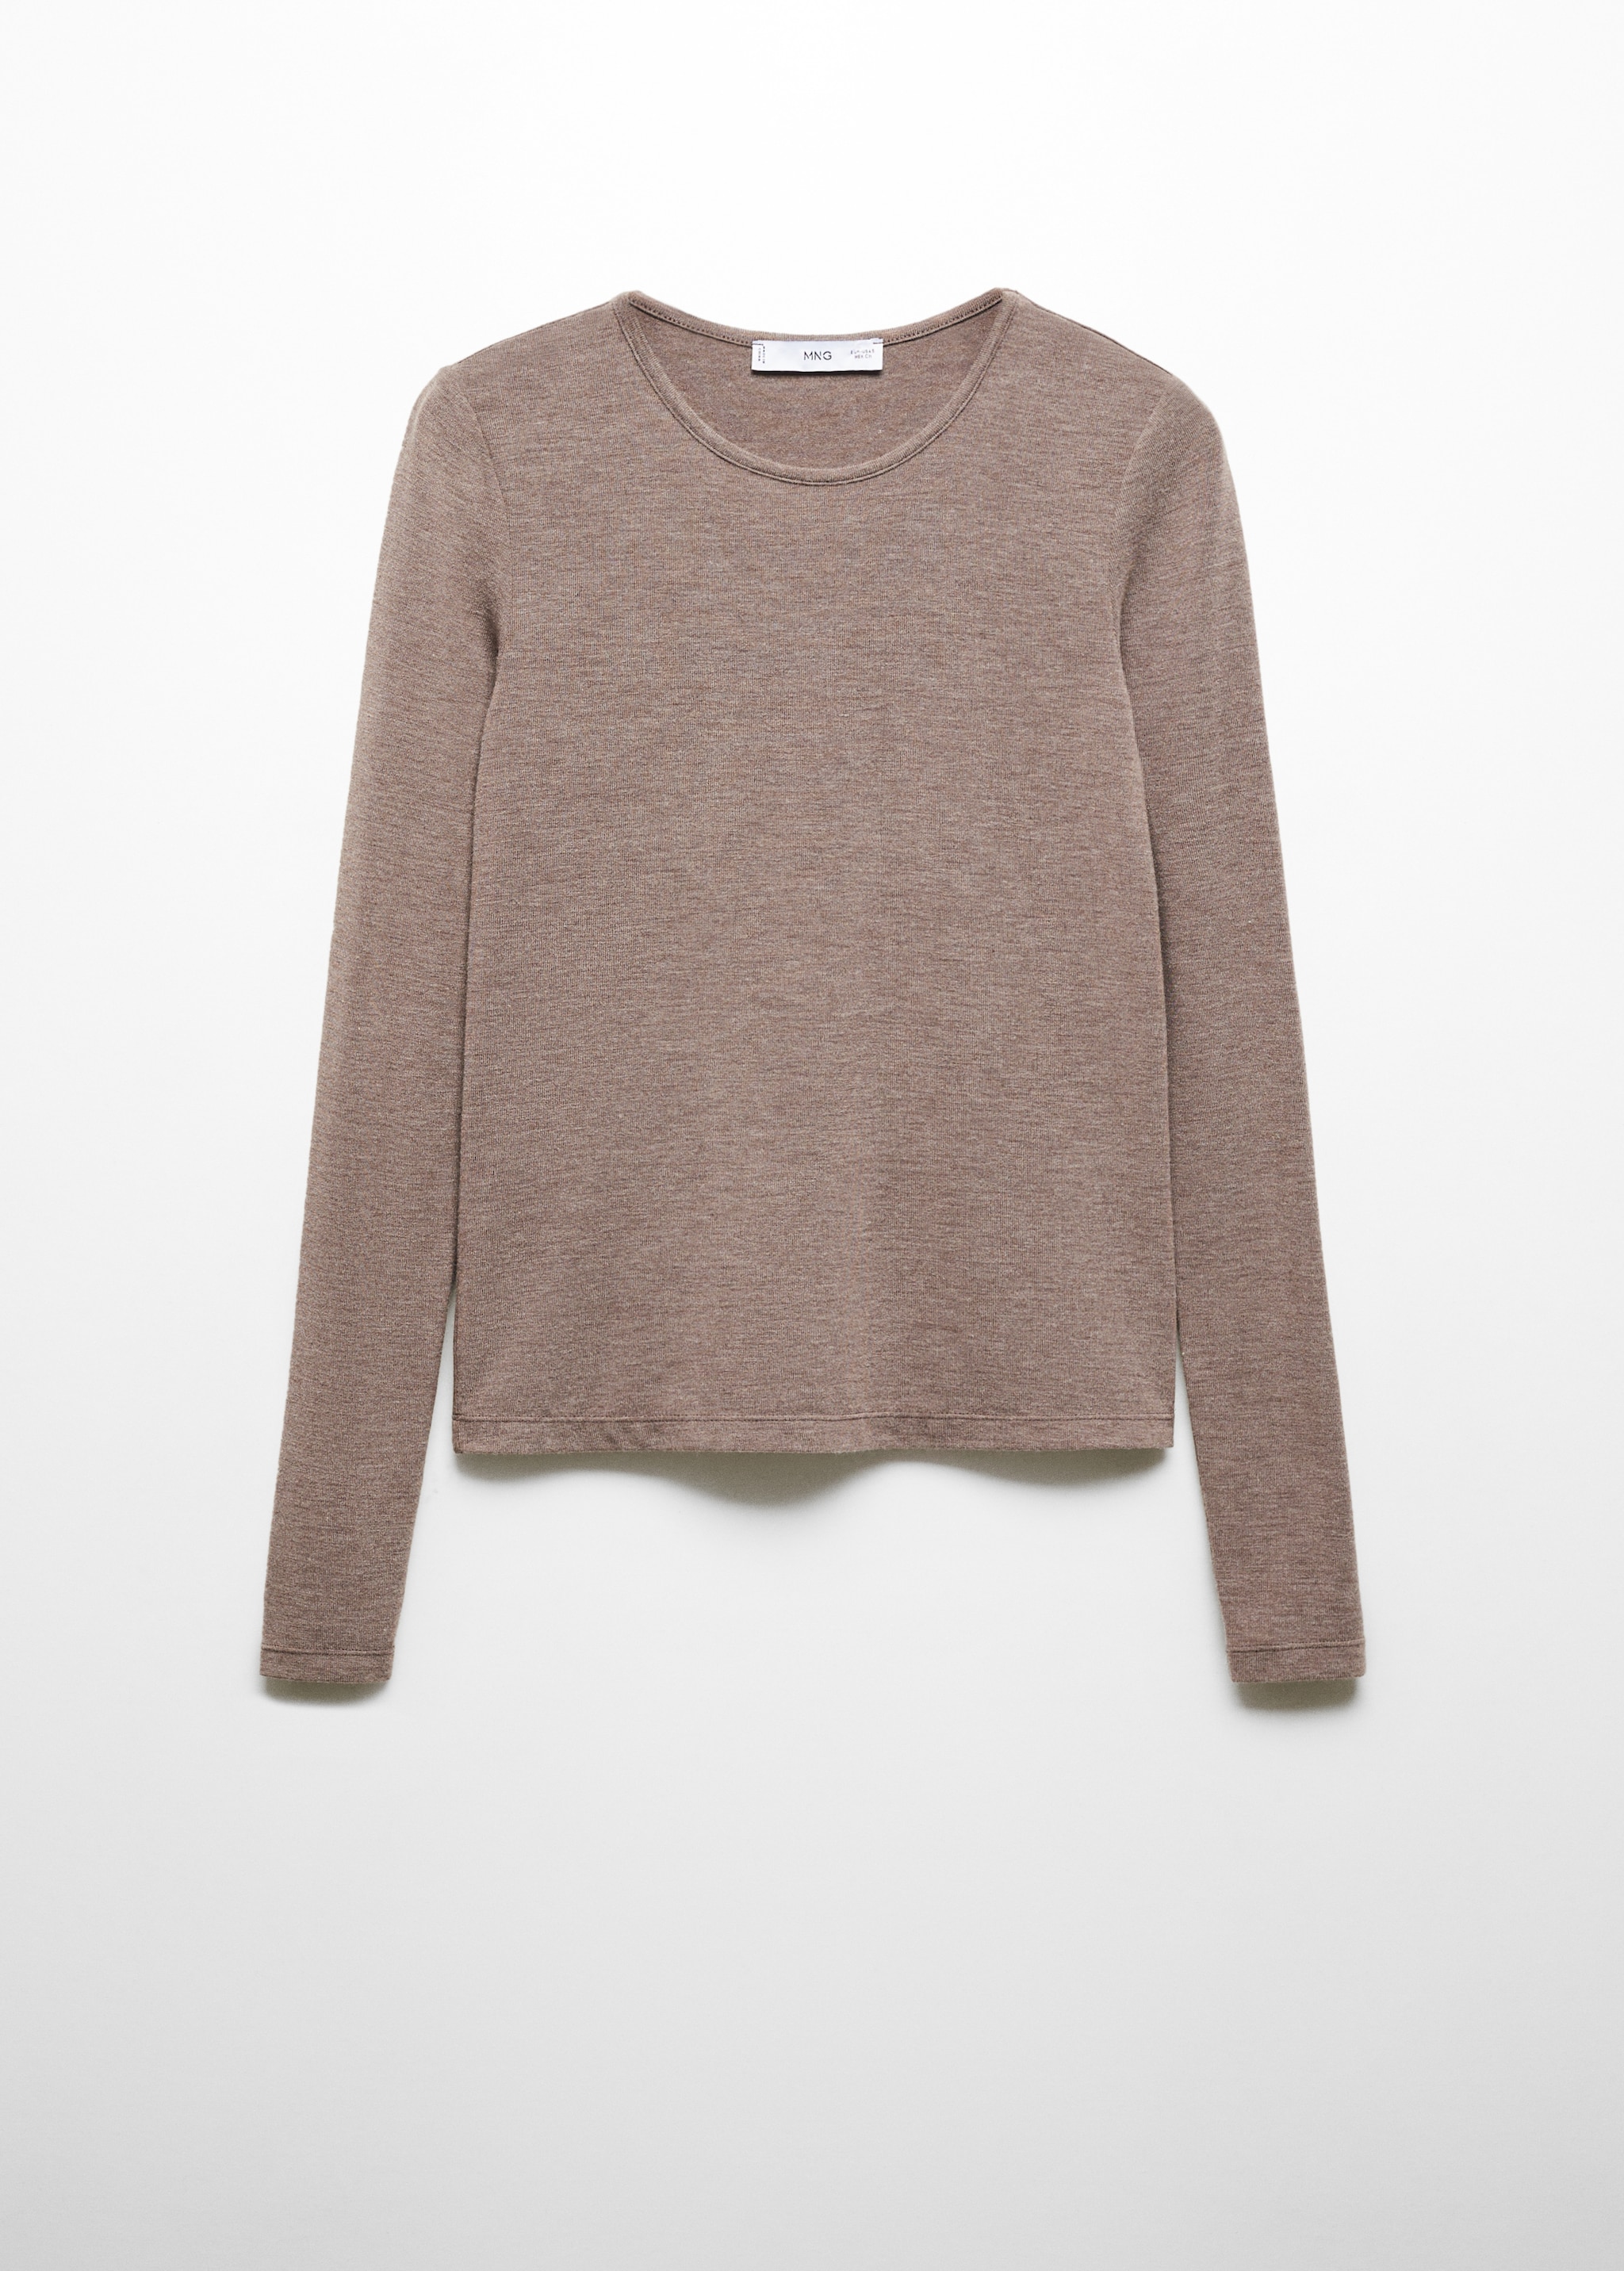 Round-neck knitted t-shirt - Article without model